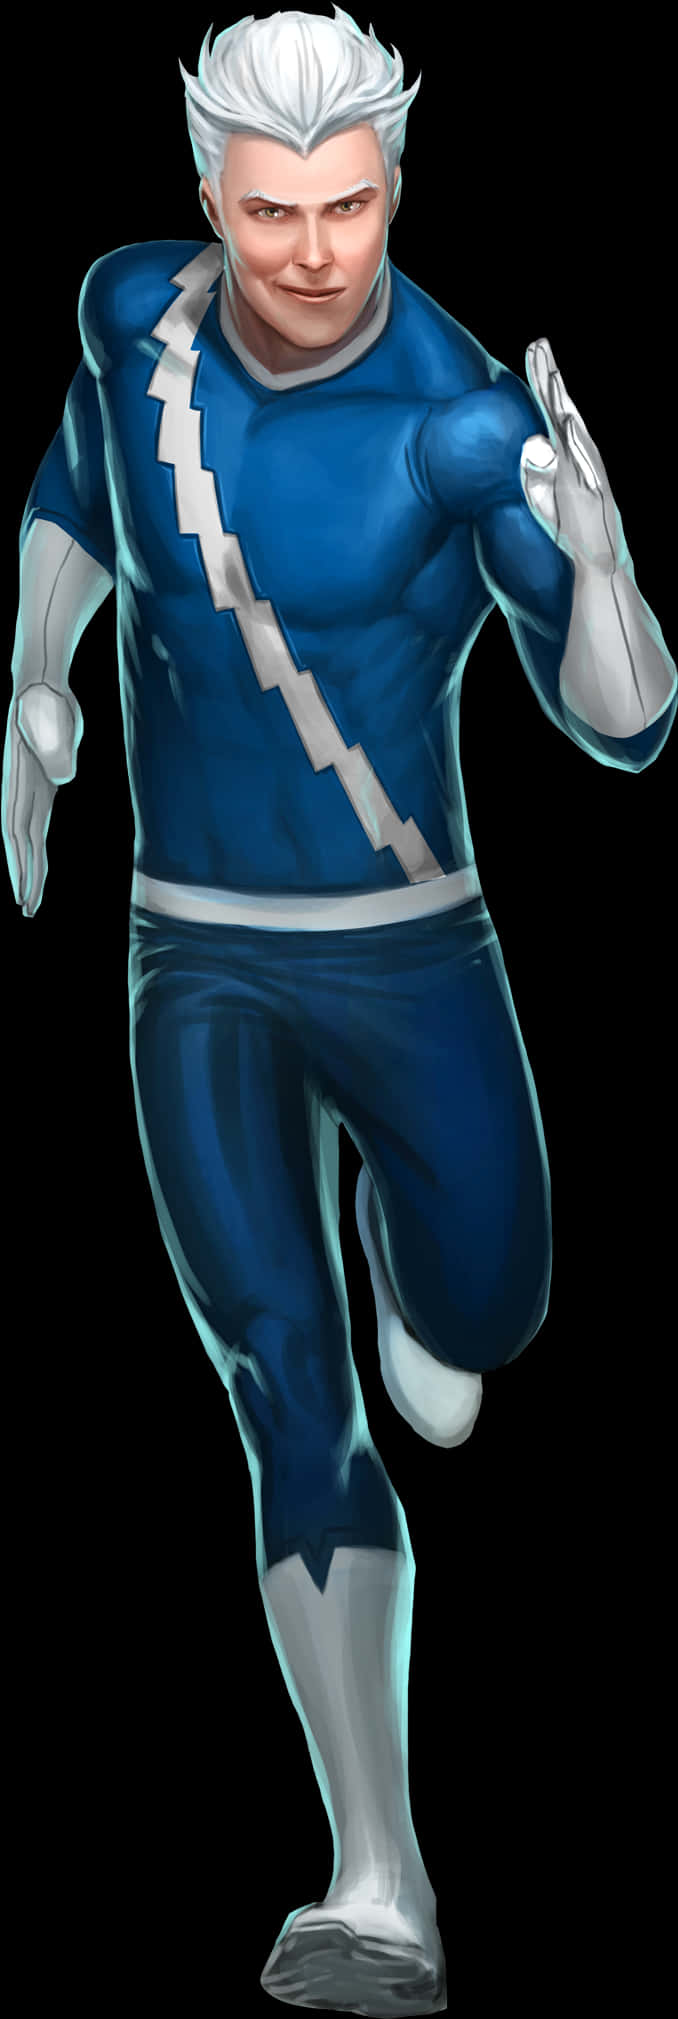 Quicksilver Animated Character Pose PNG